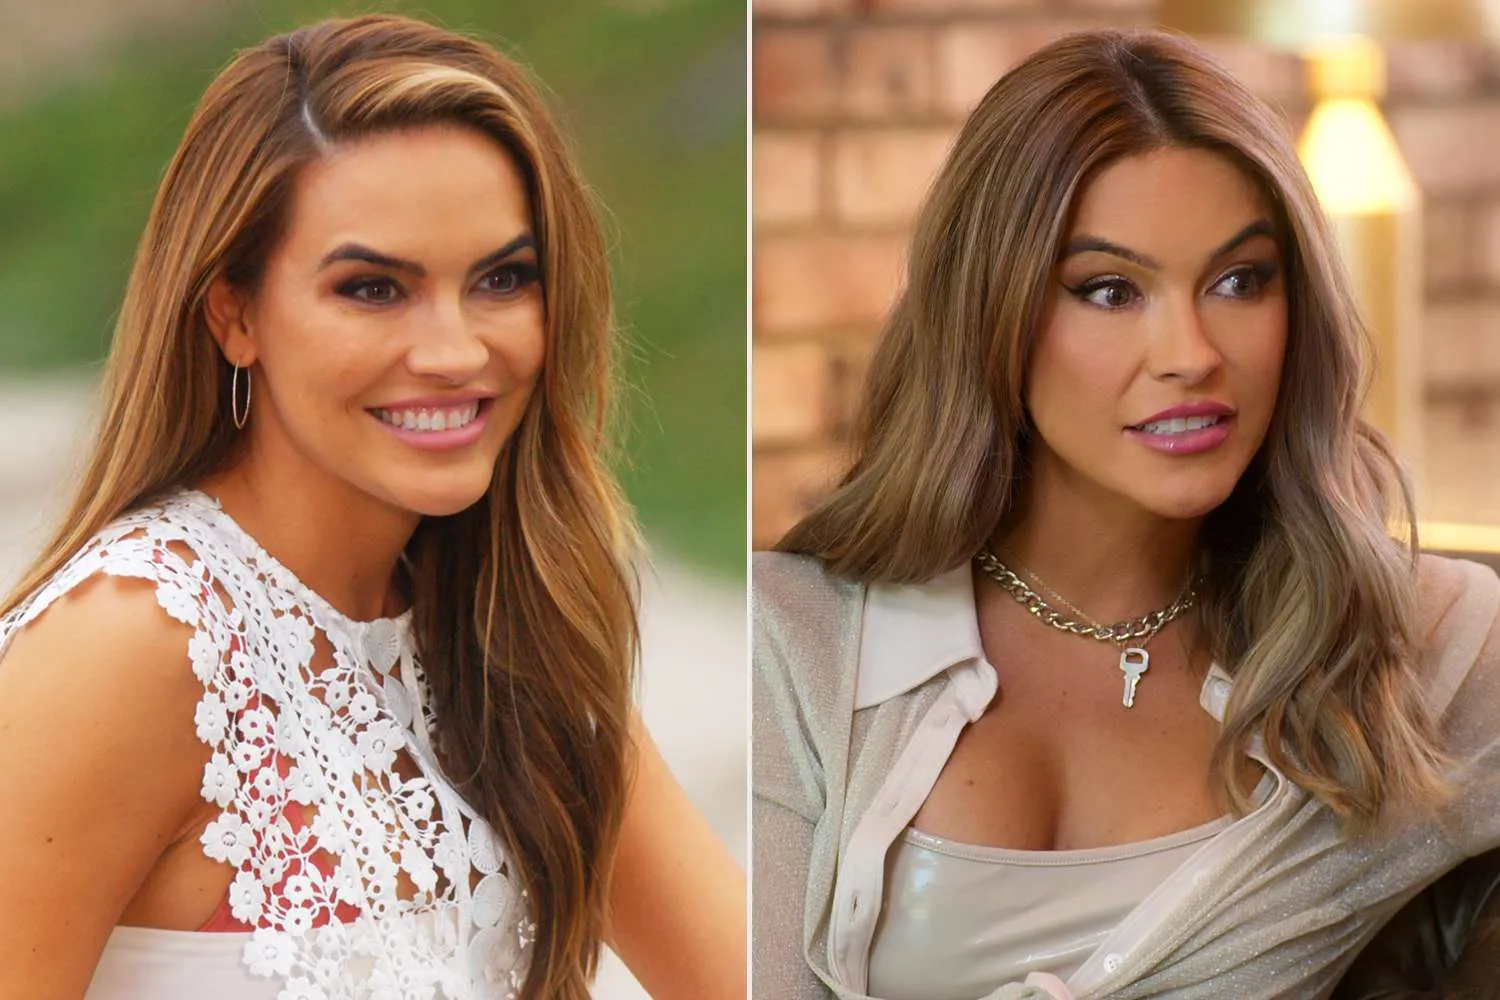 Chrishell Stause Before and After